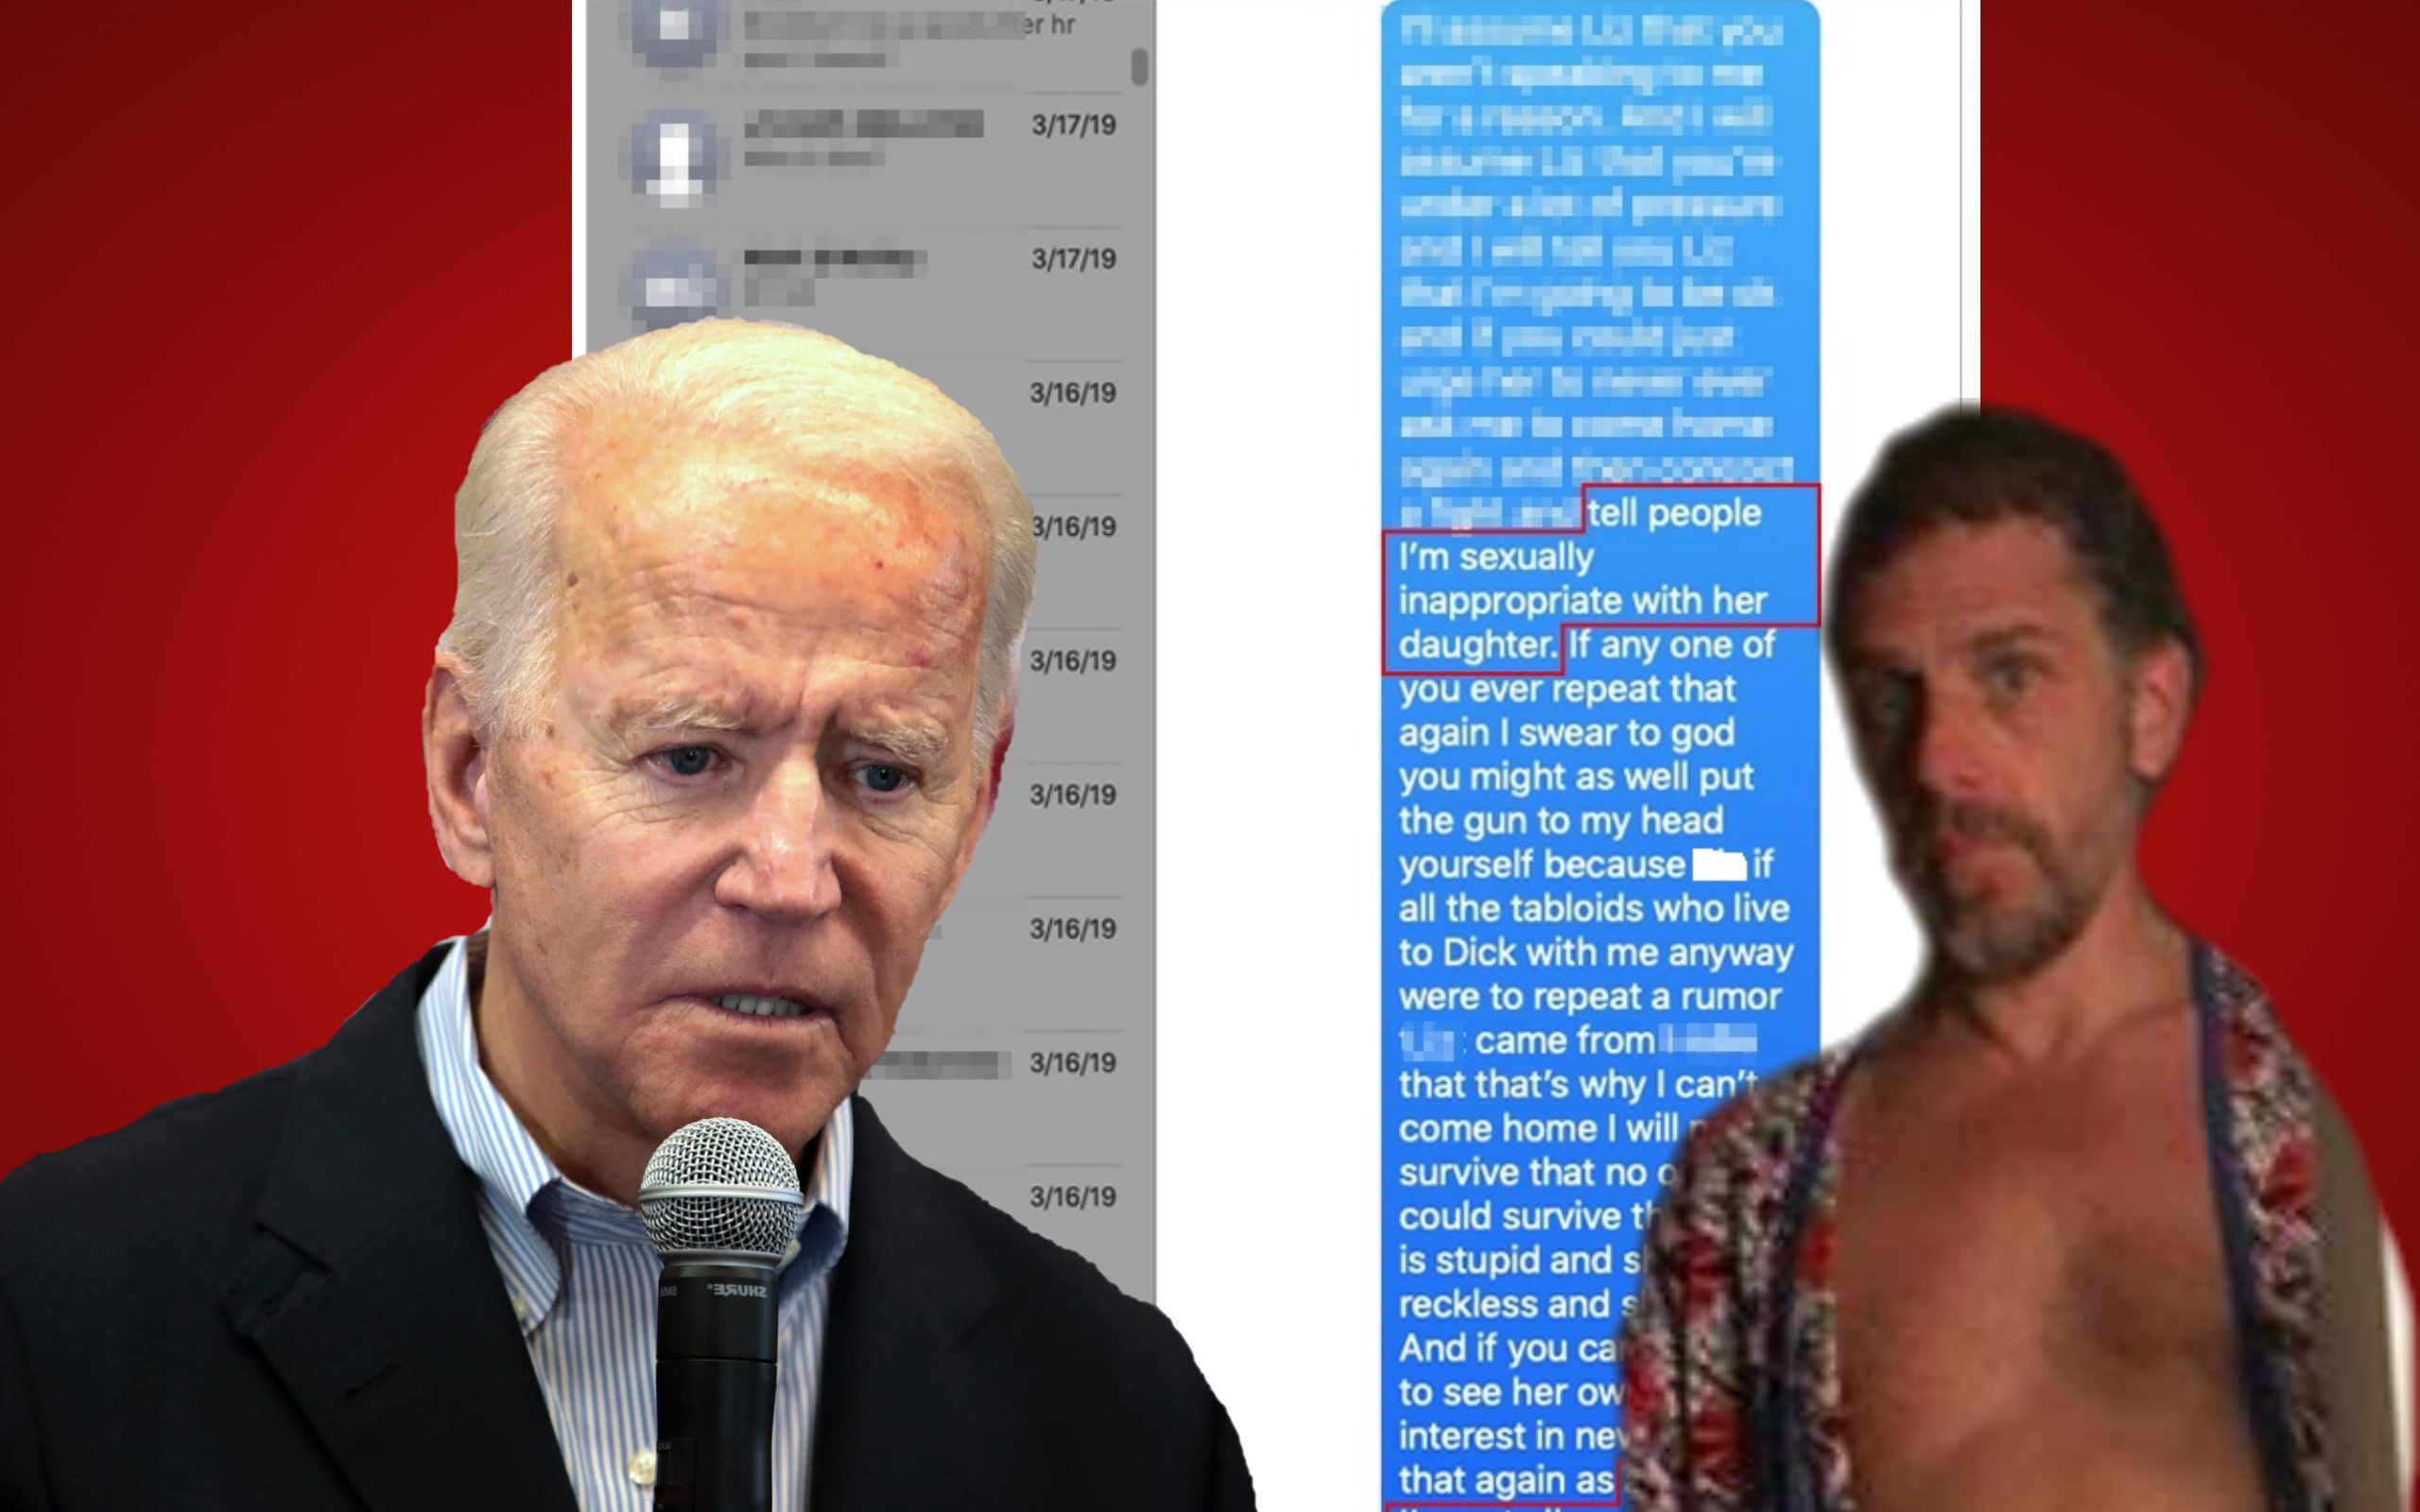 When TGP Released Damning Material on Biden Family Perversions, Potential Blackmail, and Cover-Ups - The Deep State FBI and Twitter Freaked | The Gateway Pundit | by Joe Hoft